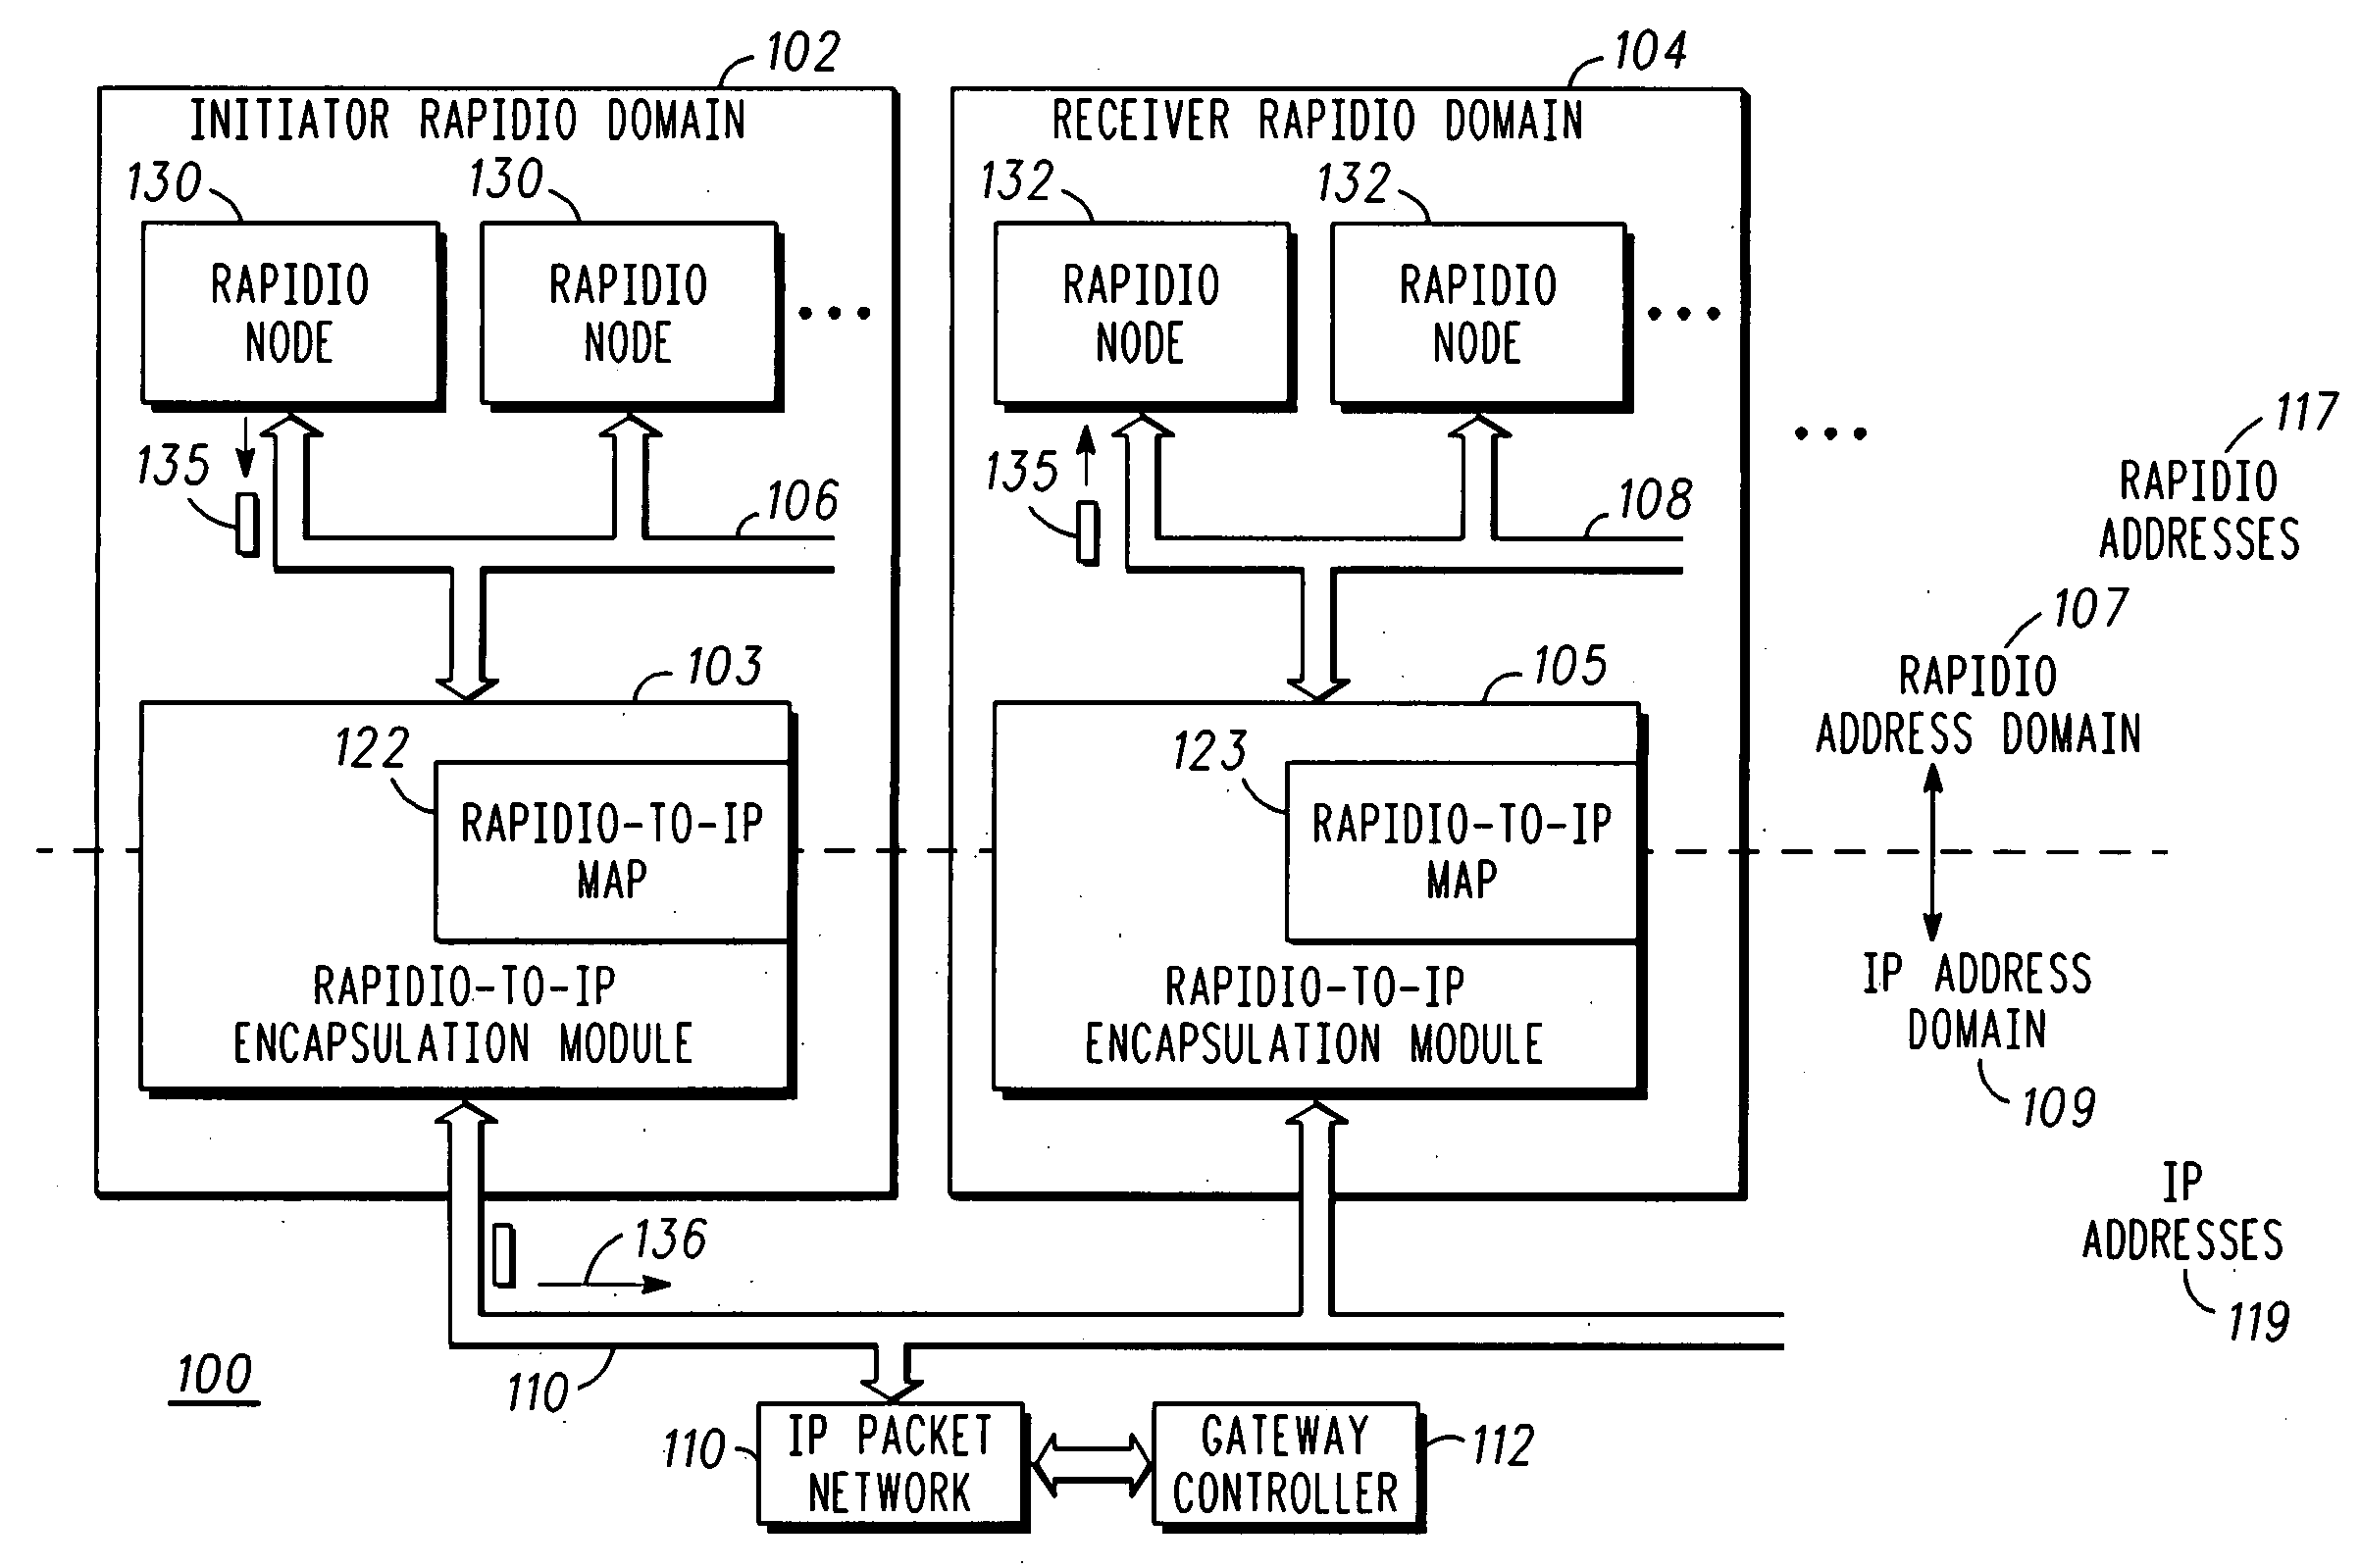 Method of transporting a RapidIO packet over an IP packet network